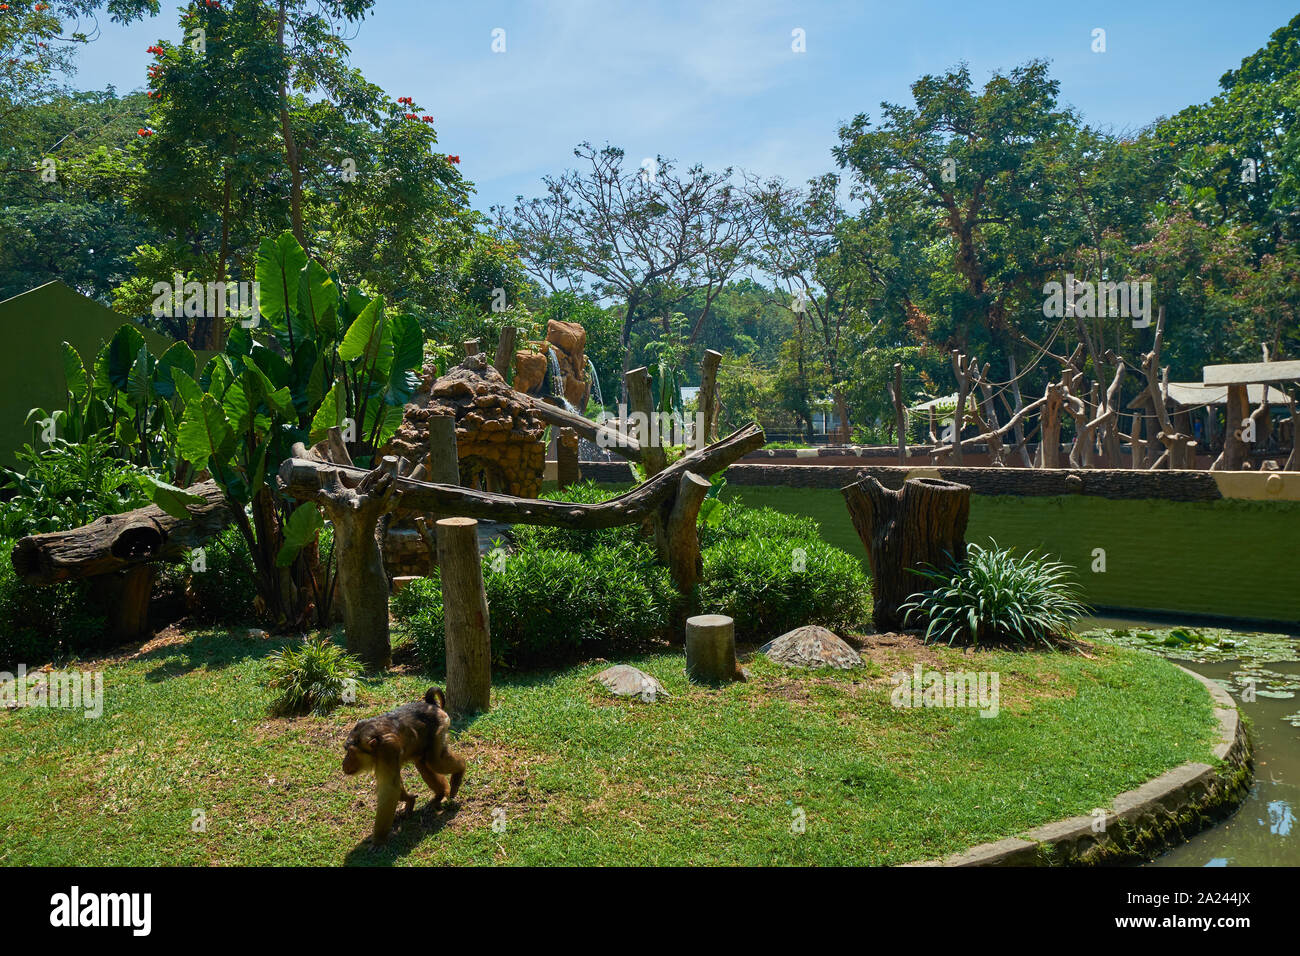 A look at some of the animal enclosures at the main city zoo in Surabaya, Indonesia. Stock Photo